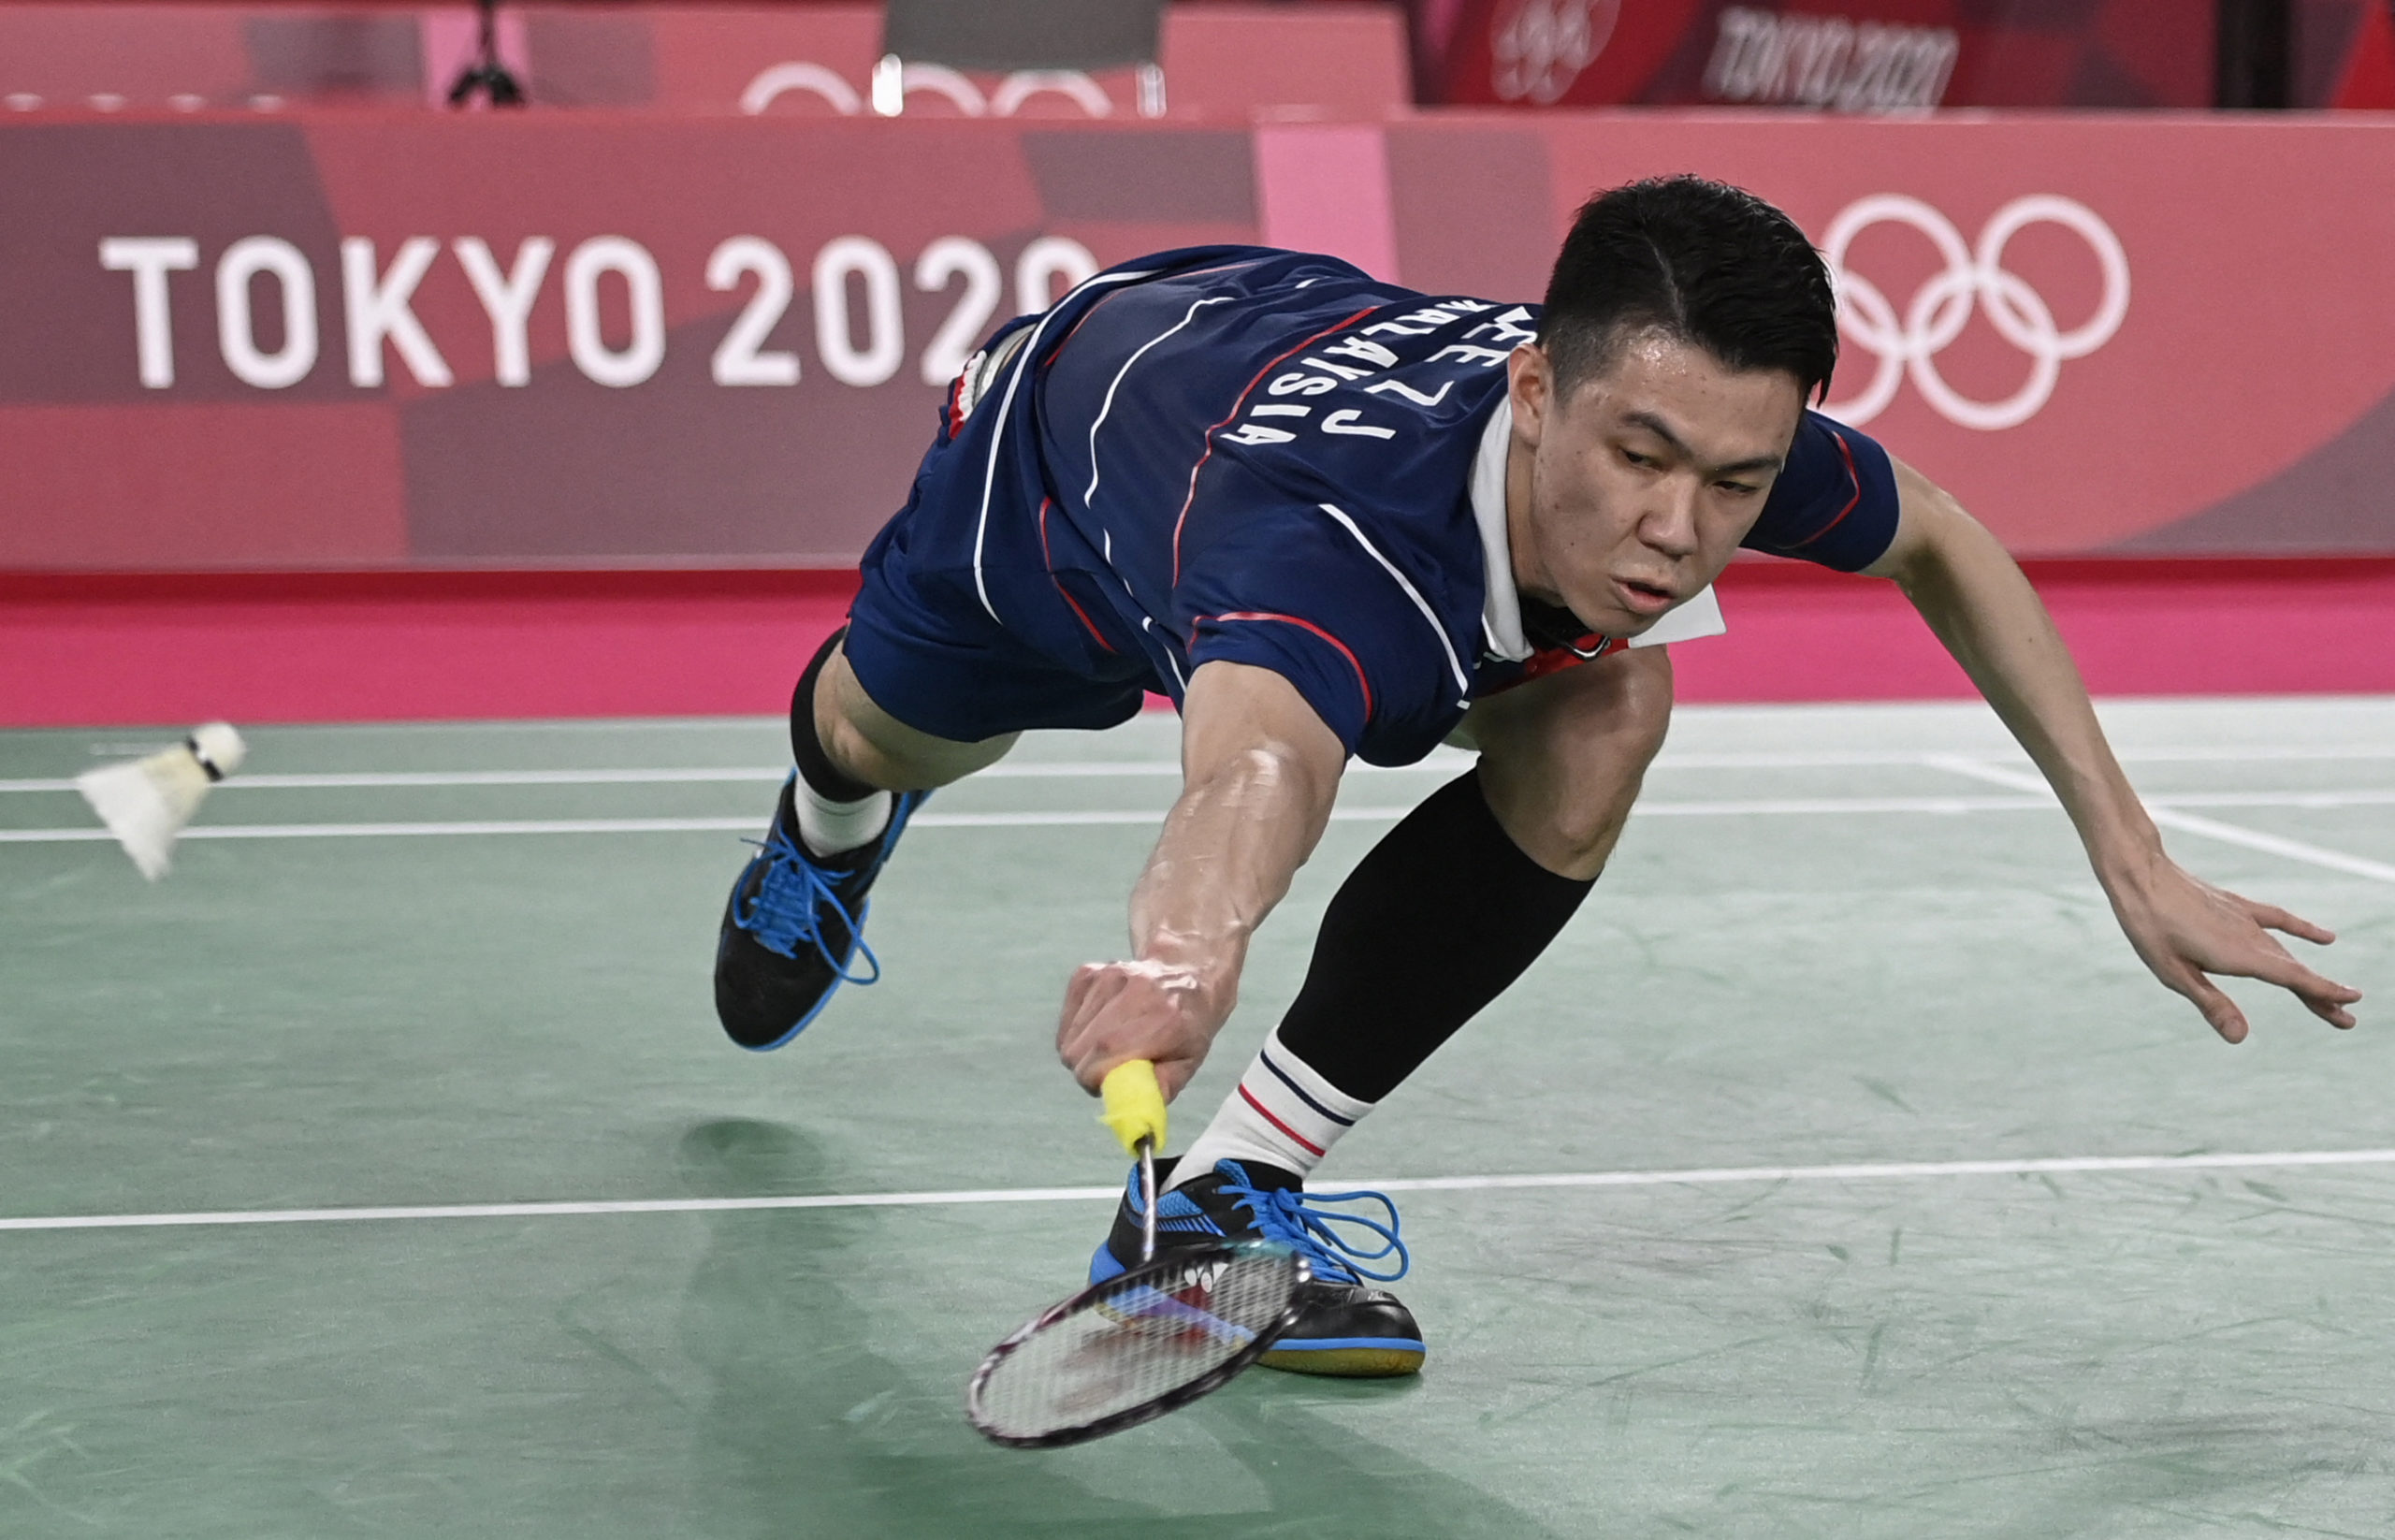 The latest on Malaysias exploit at the 2021 Thomas Cup led by Lee Zii Jia